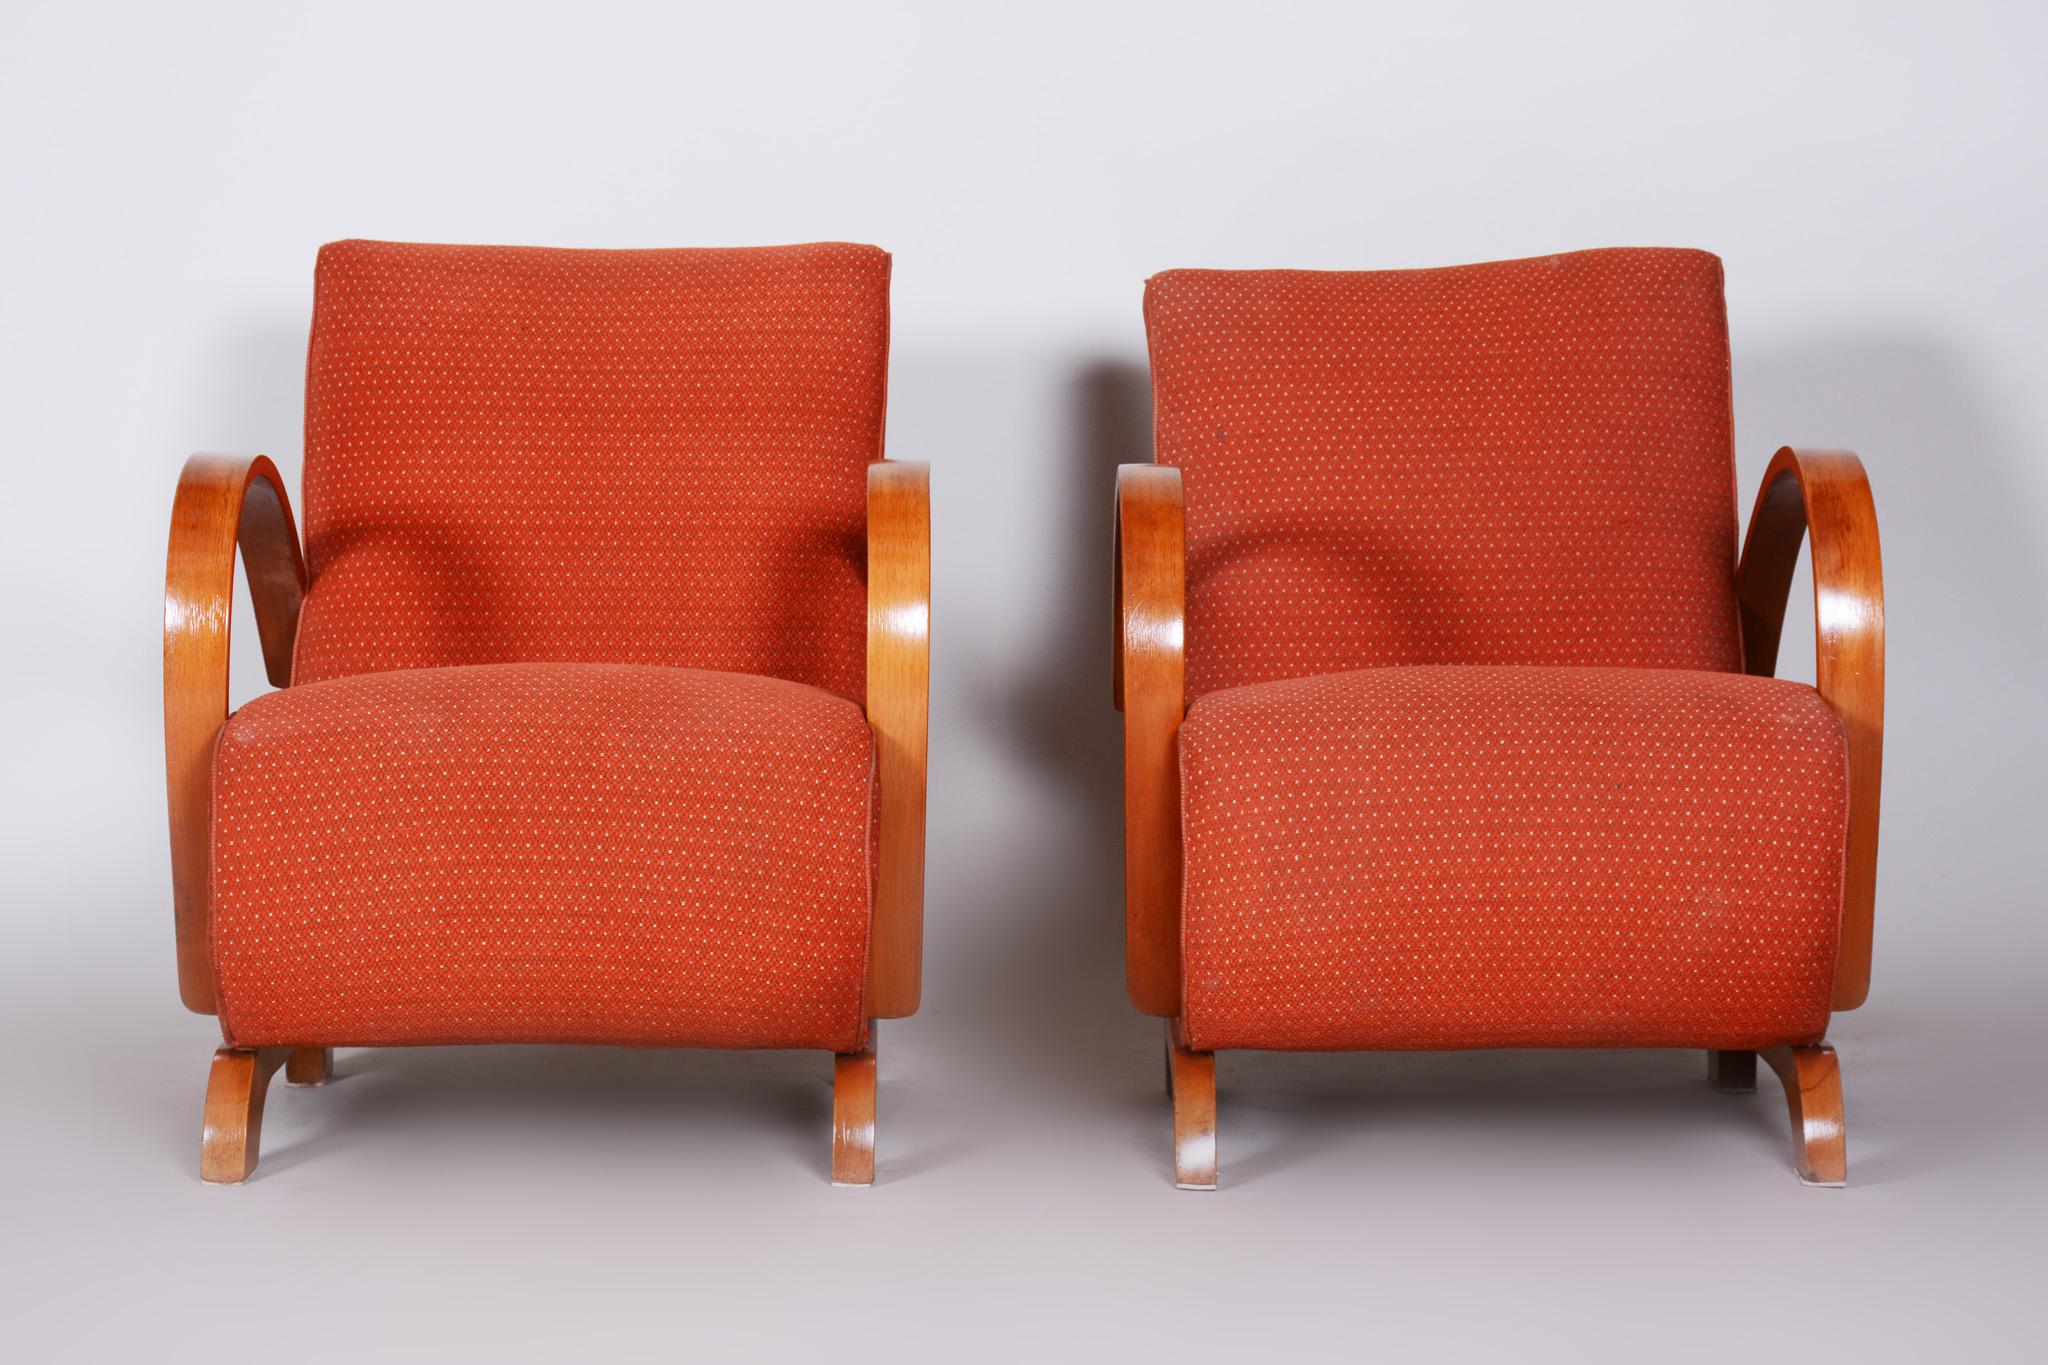 Pair of Art Deco armchairs.
United Arts & Crafts manufacture. (UP Závody Brno)
Designed by Jindrich Halabala.
Original condition
Material: Beech
Period: 1930-1939.
 